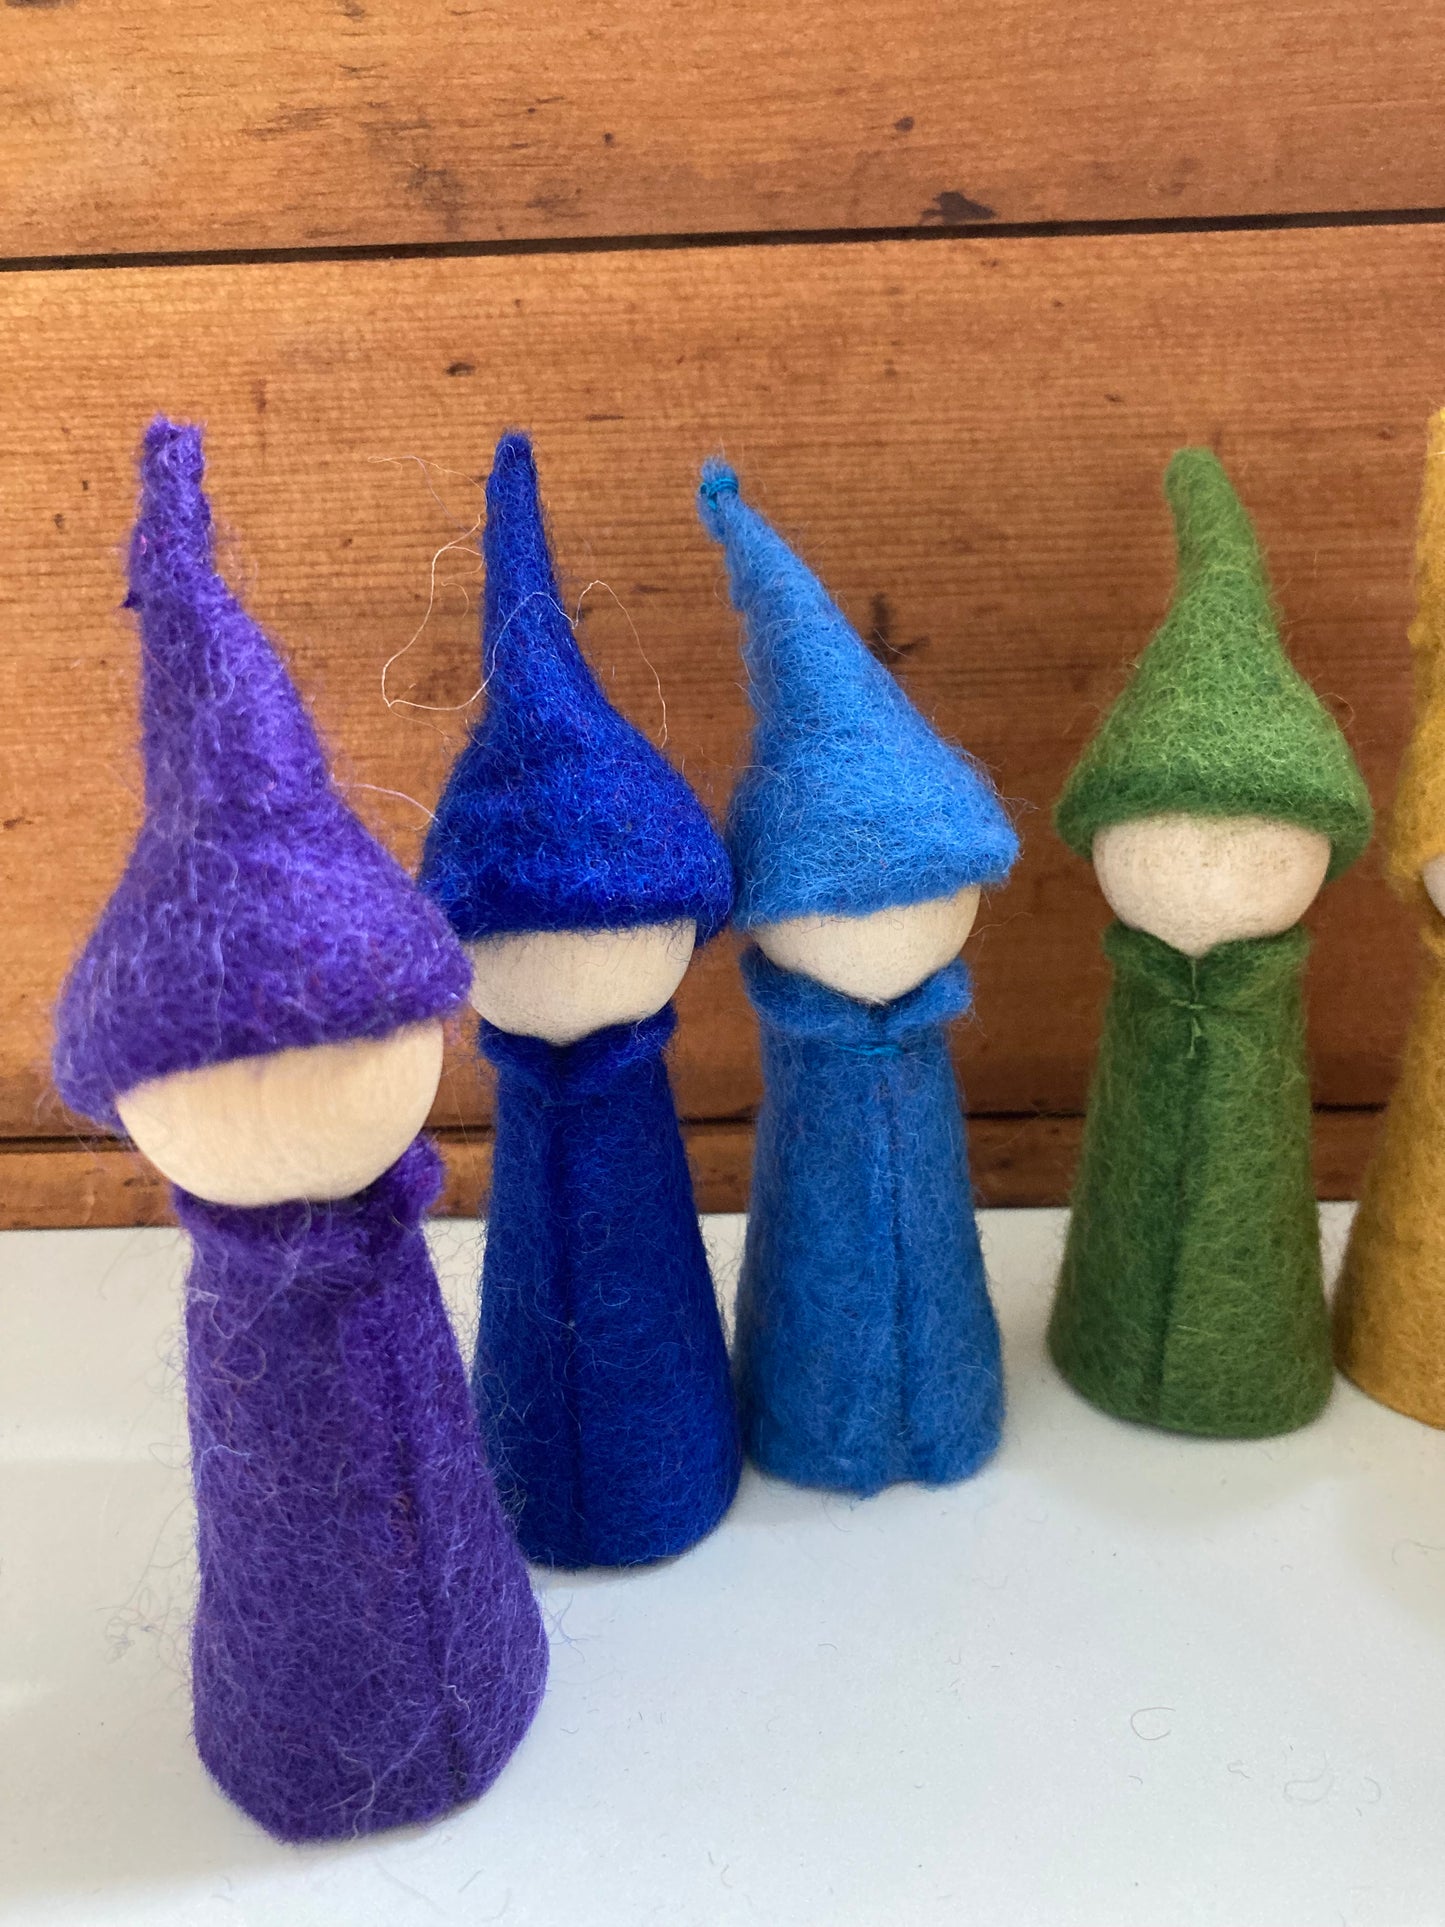 Wooden Toy for Dollhouse Play - RAINBOW GNOMES (all7!!)